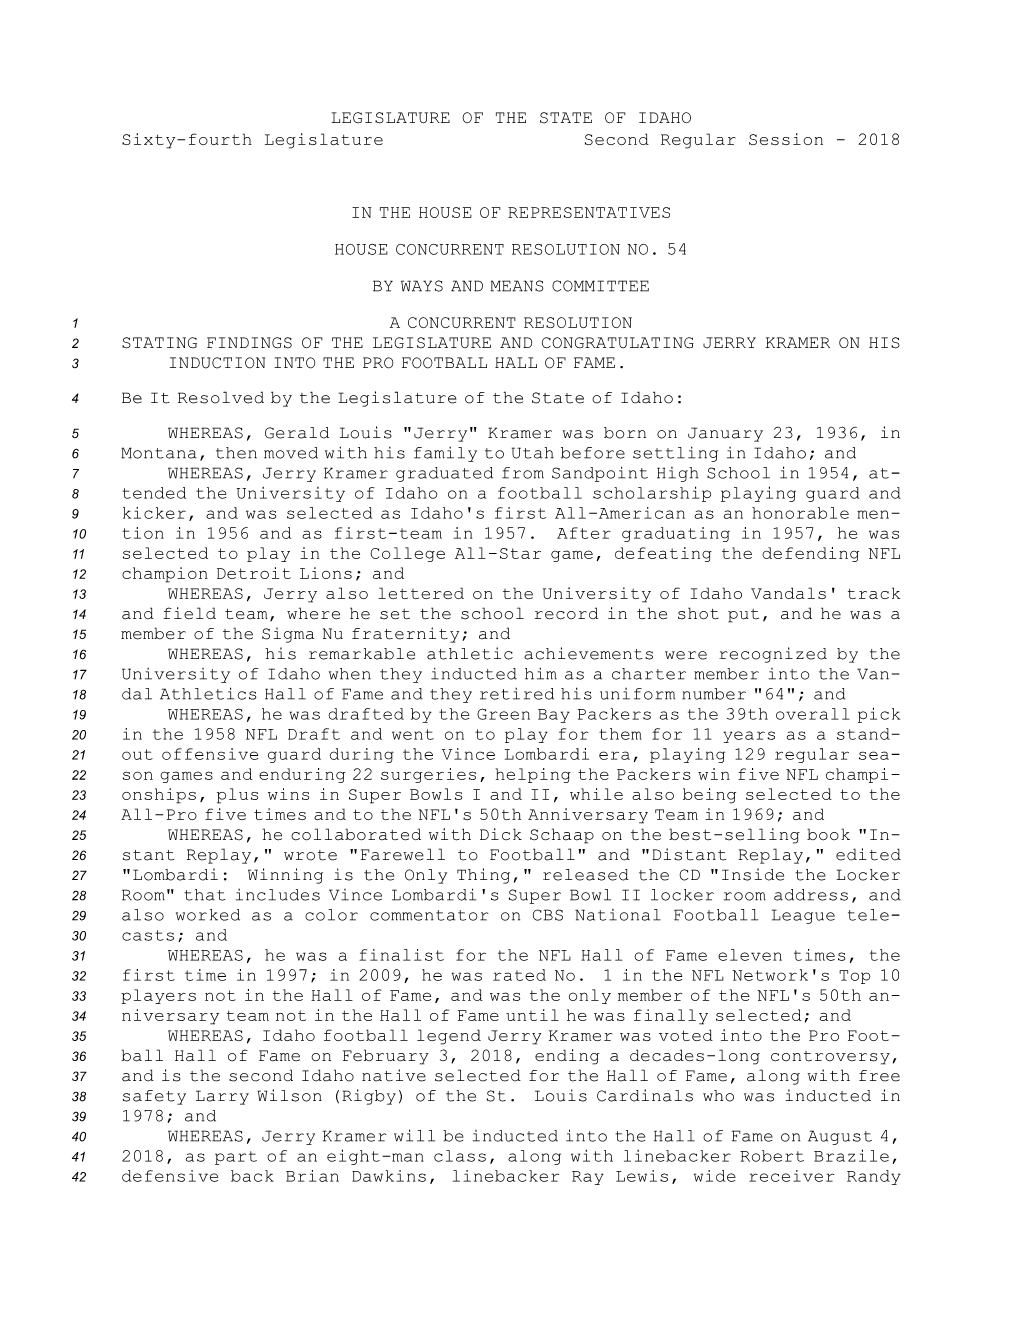 House Concurrent Resolution No